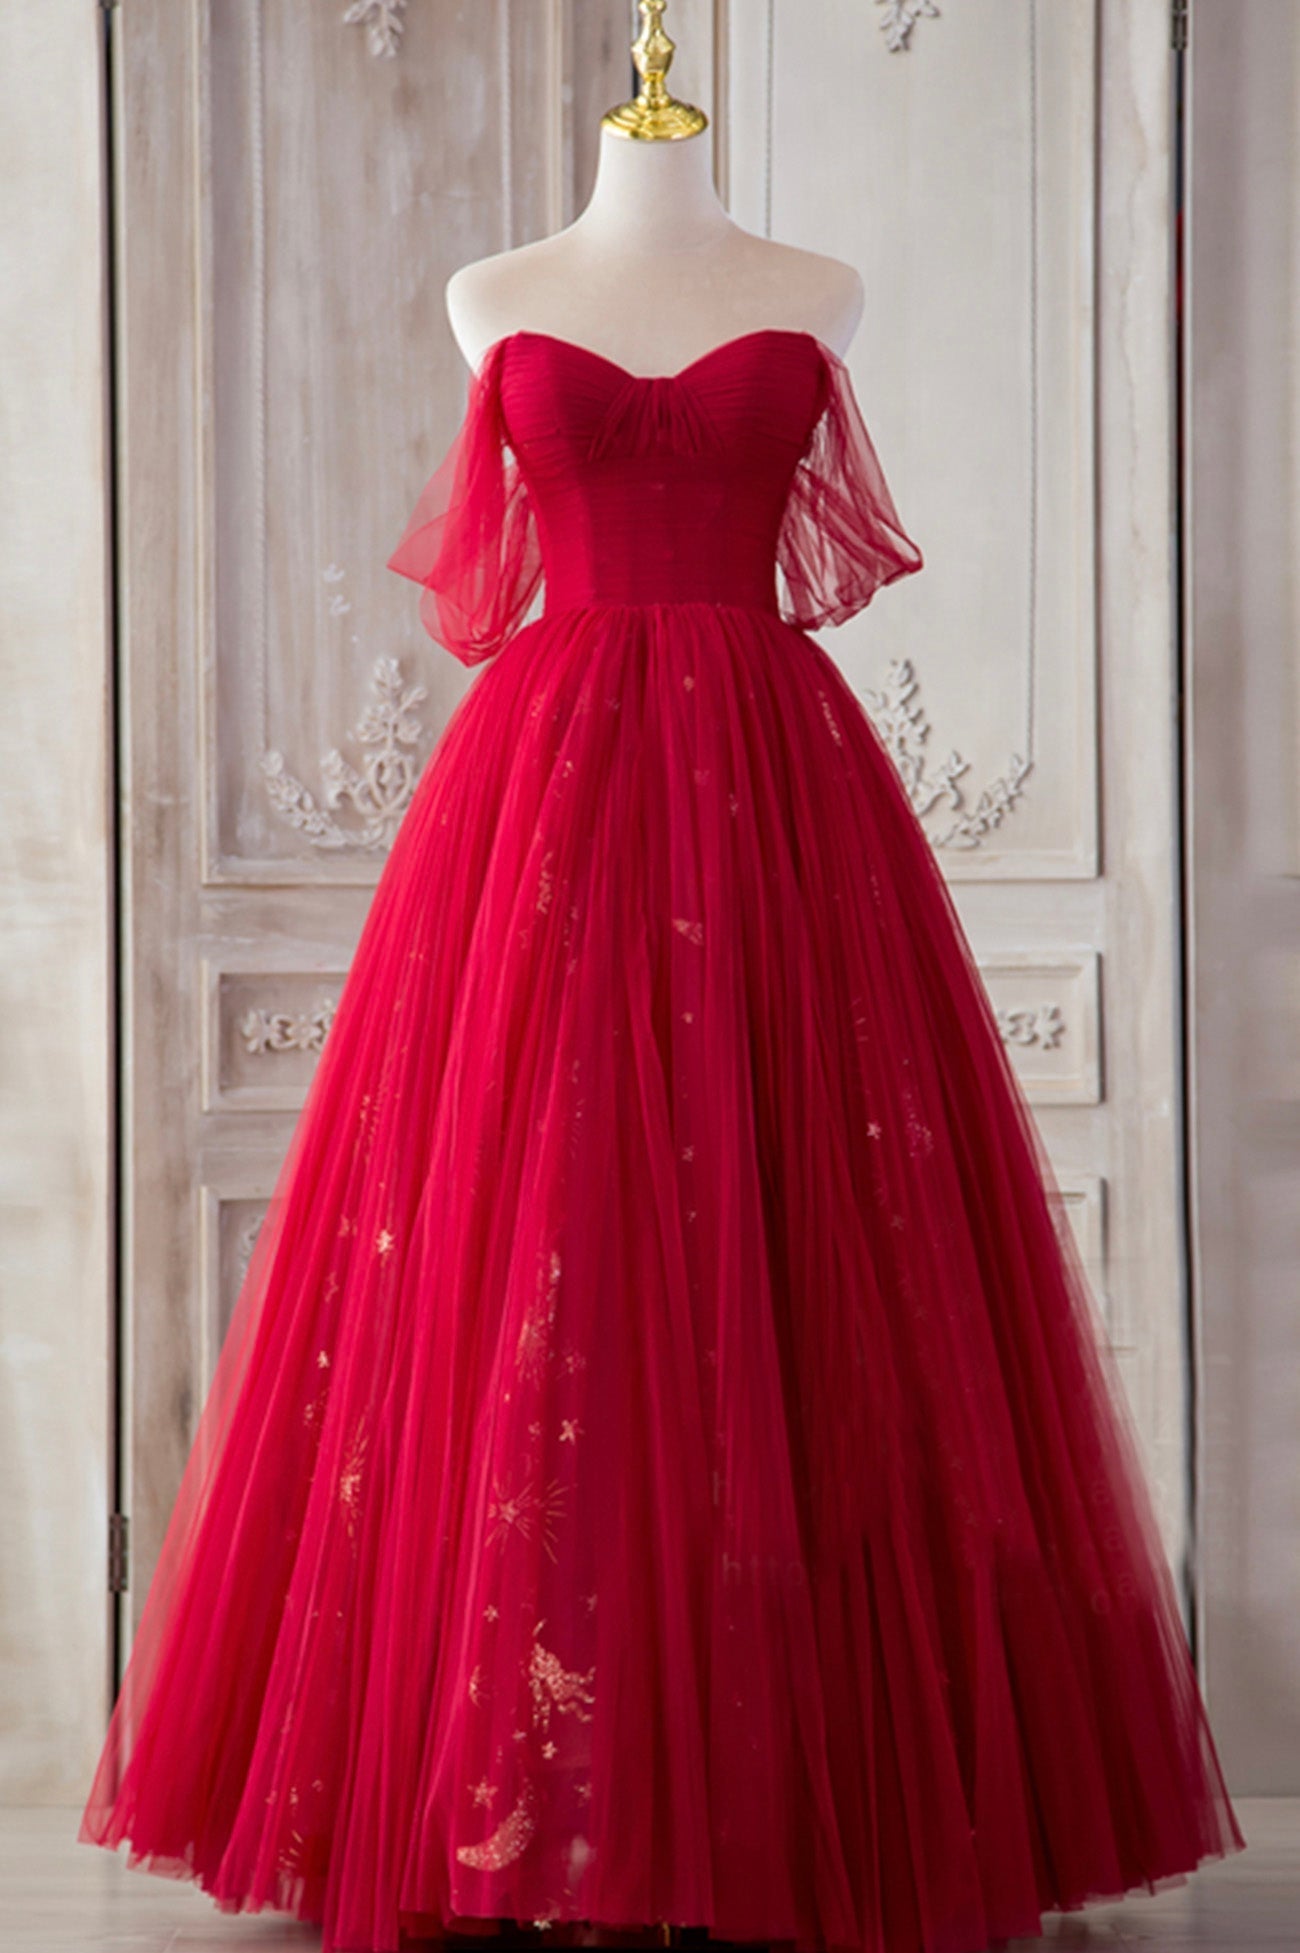 The Red Strapless Tulle Long A-Line Prom Dress Outfits For Women is a showstopper. With its off-the-shoulder design and A-line silhouette, it perfectly blends elegance and allure.